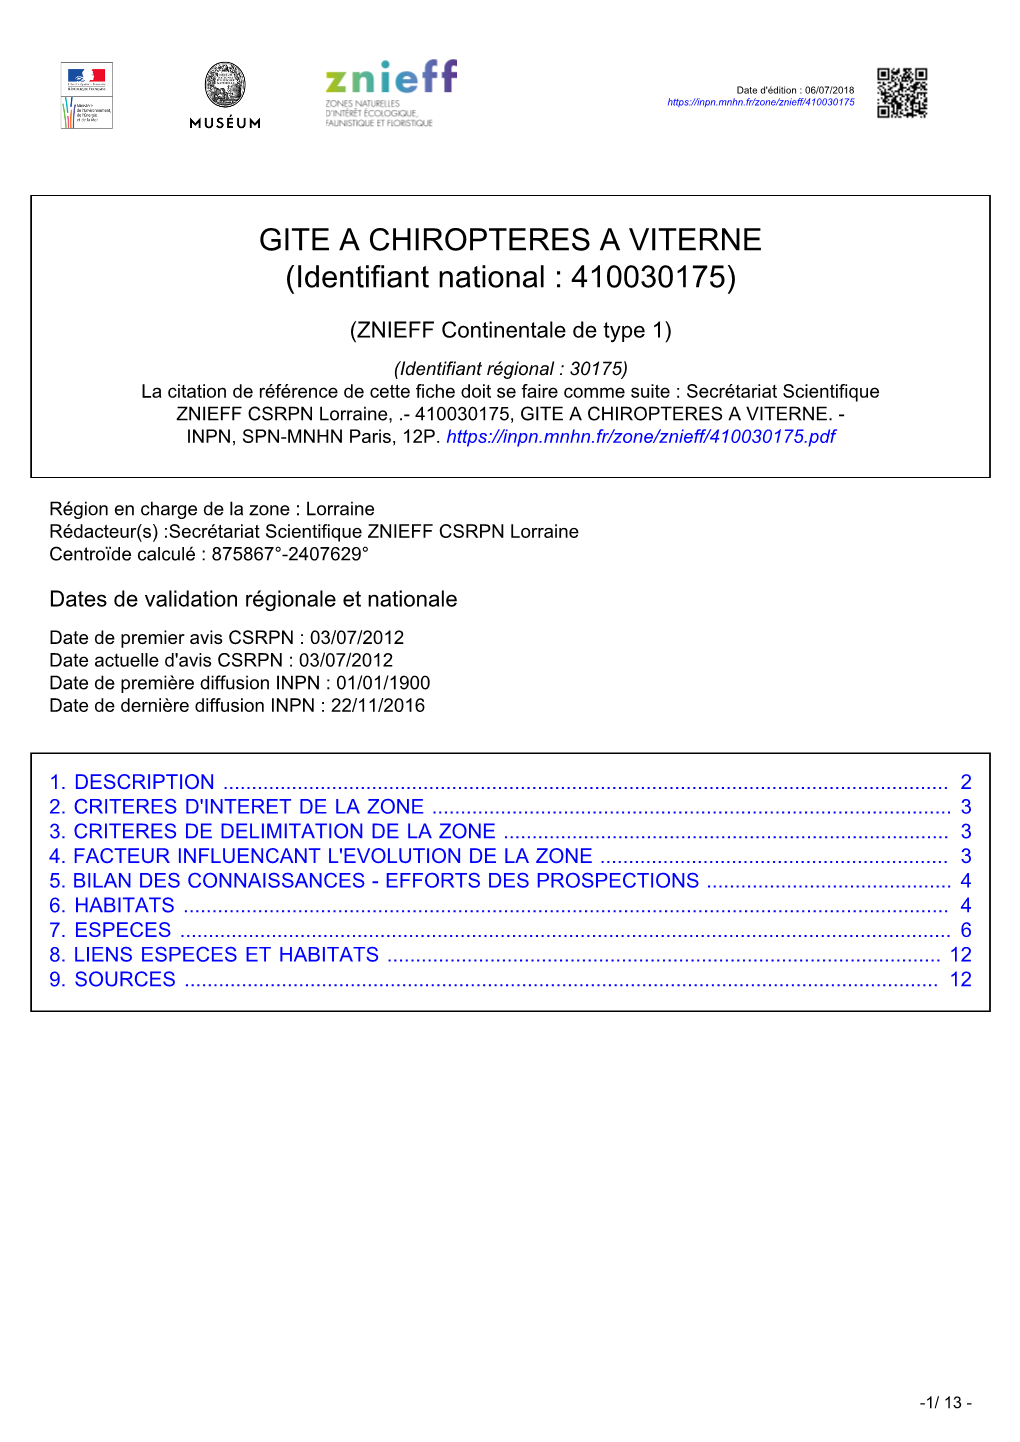 GITE a CHIROPTERES a VITERNE (Identifiant National : 410030175)